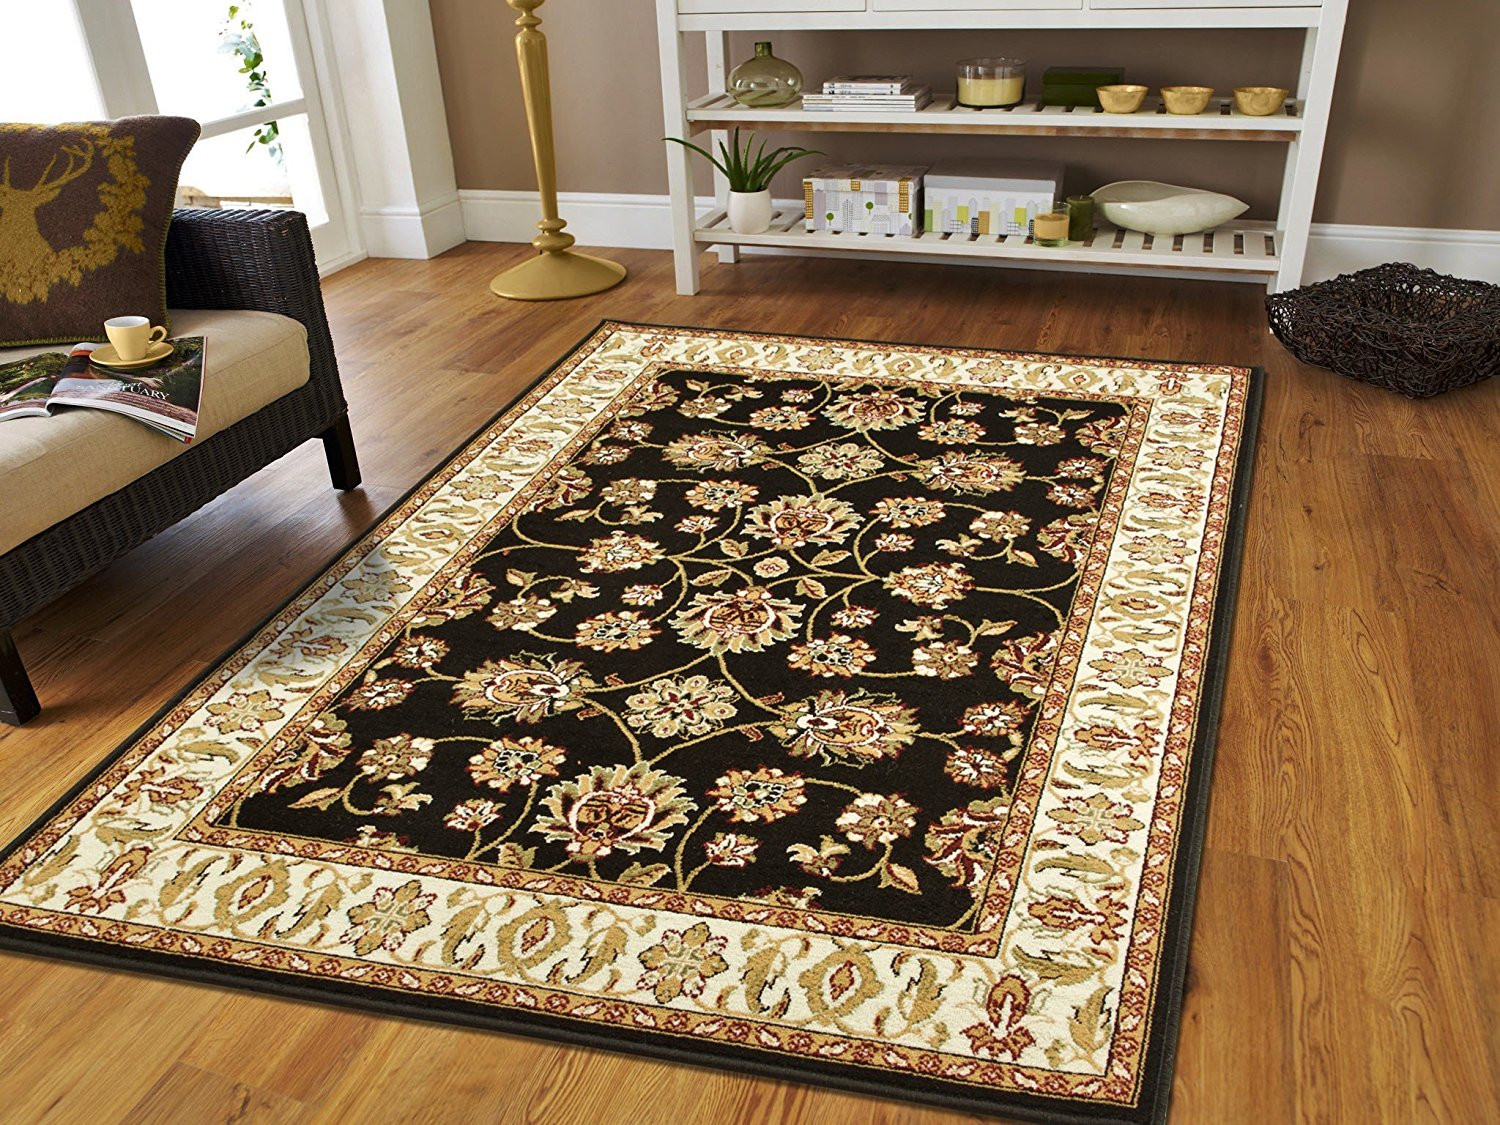 Walmart Living Room Rugs
 Black Traditial Rugs 8x11 Rugs for Living Room and